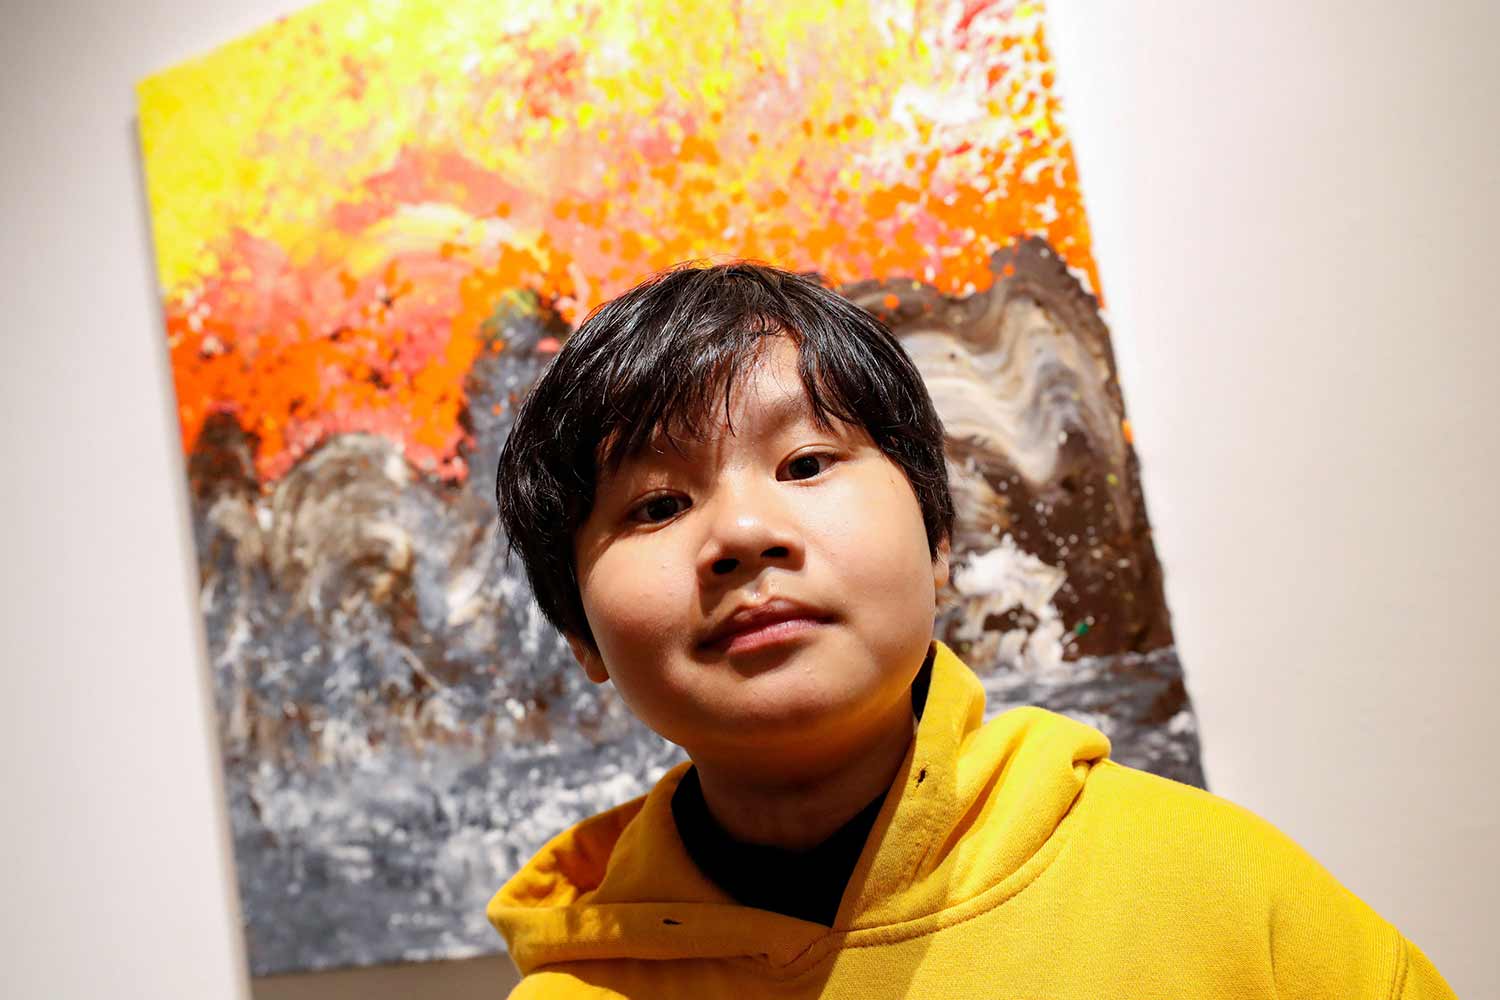 A young boy poses in front of a painting.